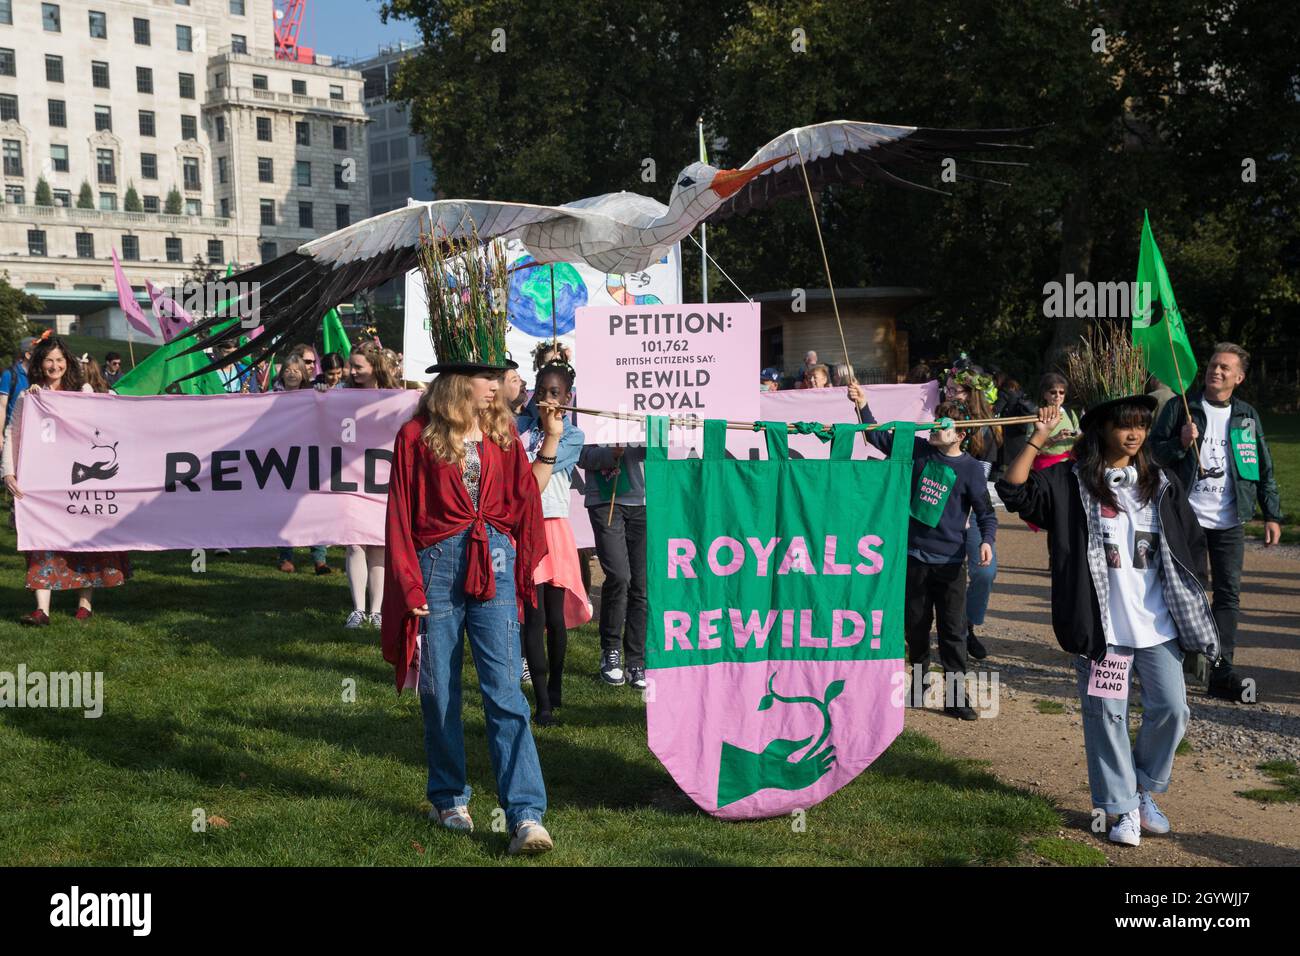 London, UK. 9th October, 2021. Climate activists, including many families, take part in a Rewild Royal Land procession to Buckingham Palace organised by Wild Card, a new campaign calling on the UK’s biggest landowners to rewild, together with 38 Degrees. Campaigners including conservationist and broadcaster Chris Packham are calling on the Royal Family, the largest landowning family in the UK, to rewild their estates in order to assist with tackling the climate crisis and a 14-year-old boy presented a petition at the gates of Buckingham Palace signed by over 100,000 people. Credit: Mark Kerris Stock Photo